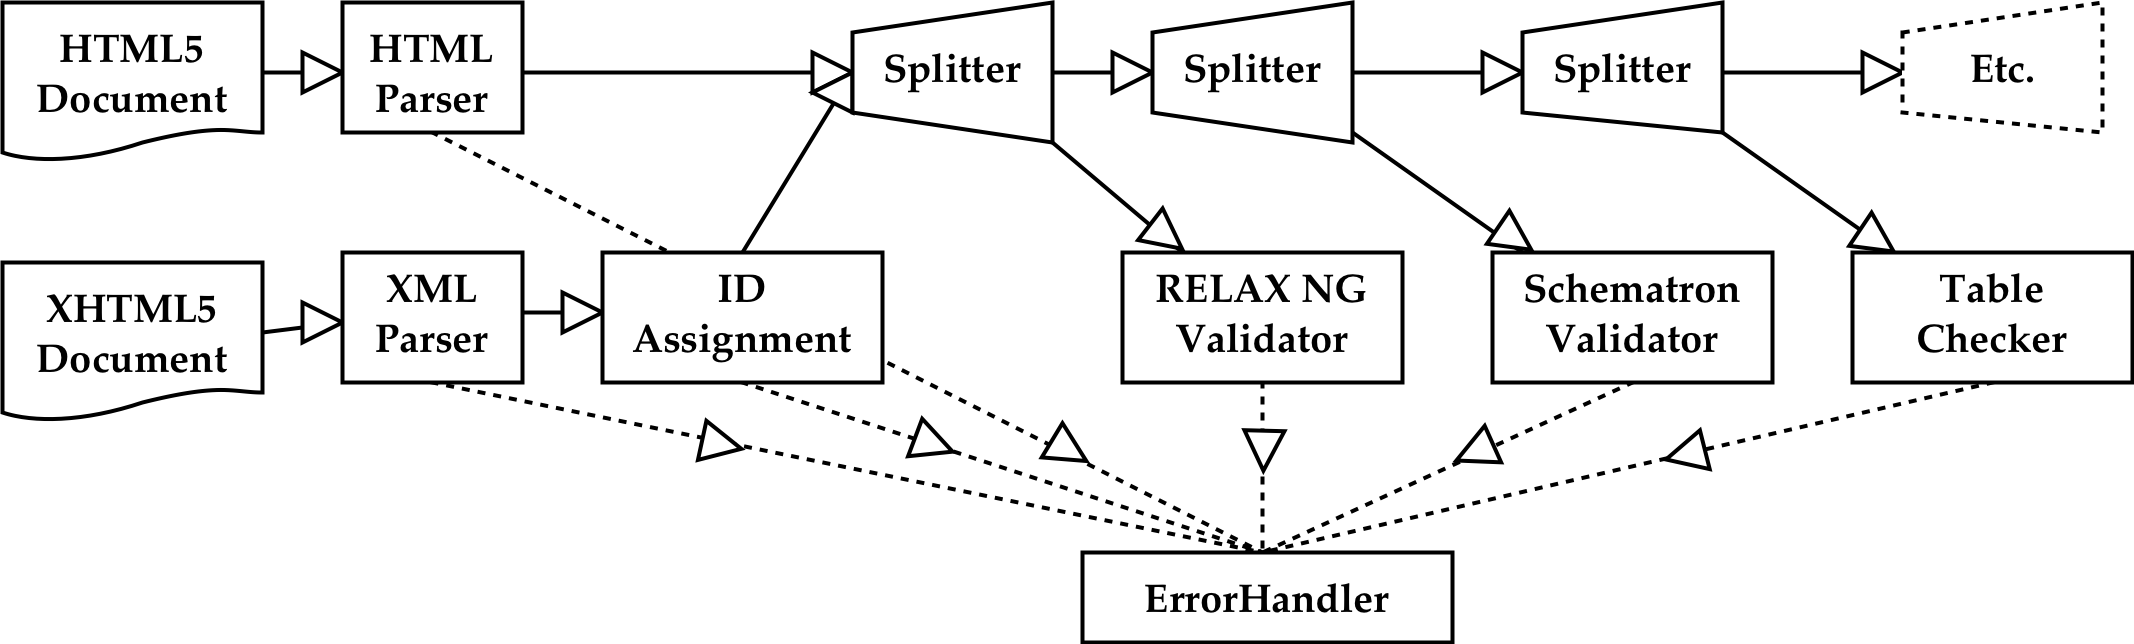 HTML5 documents are parsed using an HTML parser. XHTML5 documents are parsed using an XML parser followed by ID assignment filtering. Parse events from the parser that is used flow to a chain of SAX splitters so that the events are reported to multiple checkers including a RELAX NG validator, a Schematron validator and non-schema-based checkers.